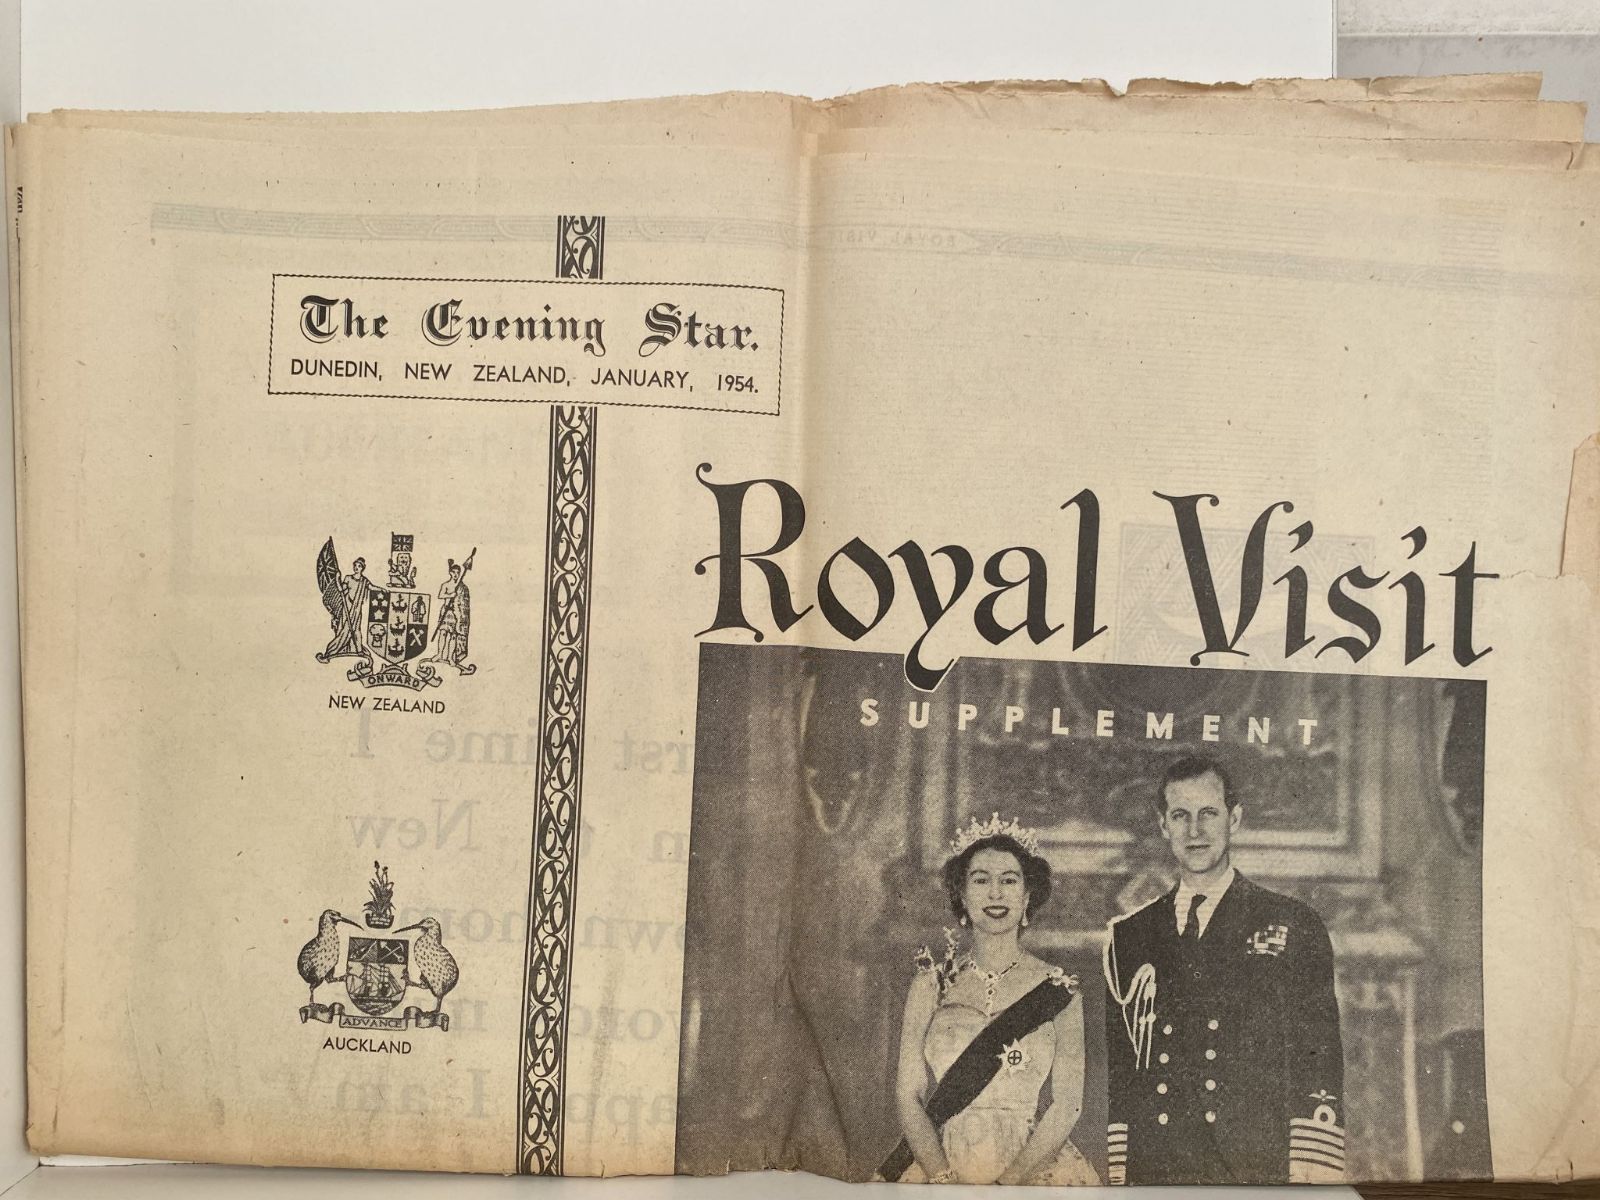 OLD NEWSPAPER: The Evening Star - Royal Visit Supplement January 1954